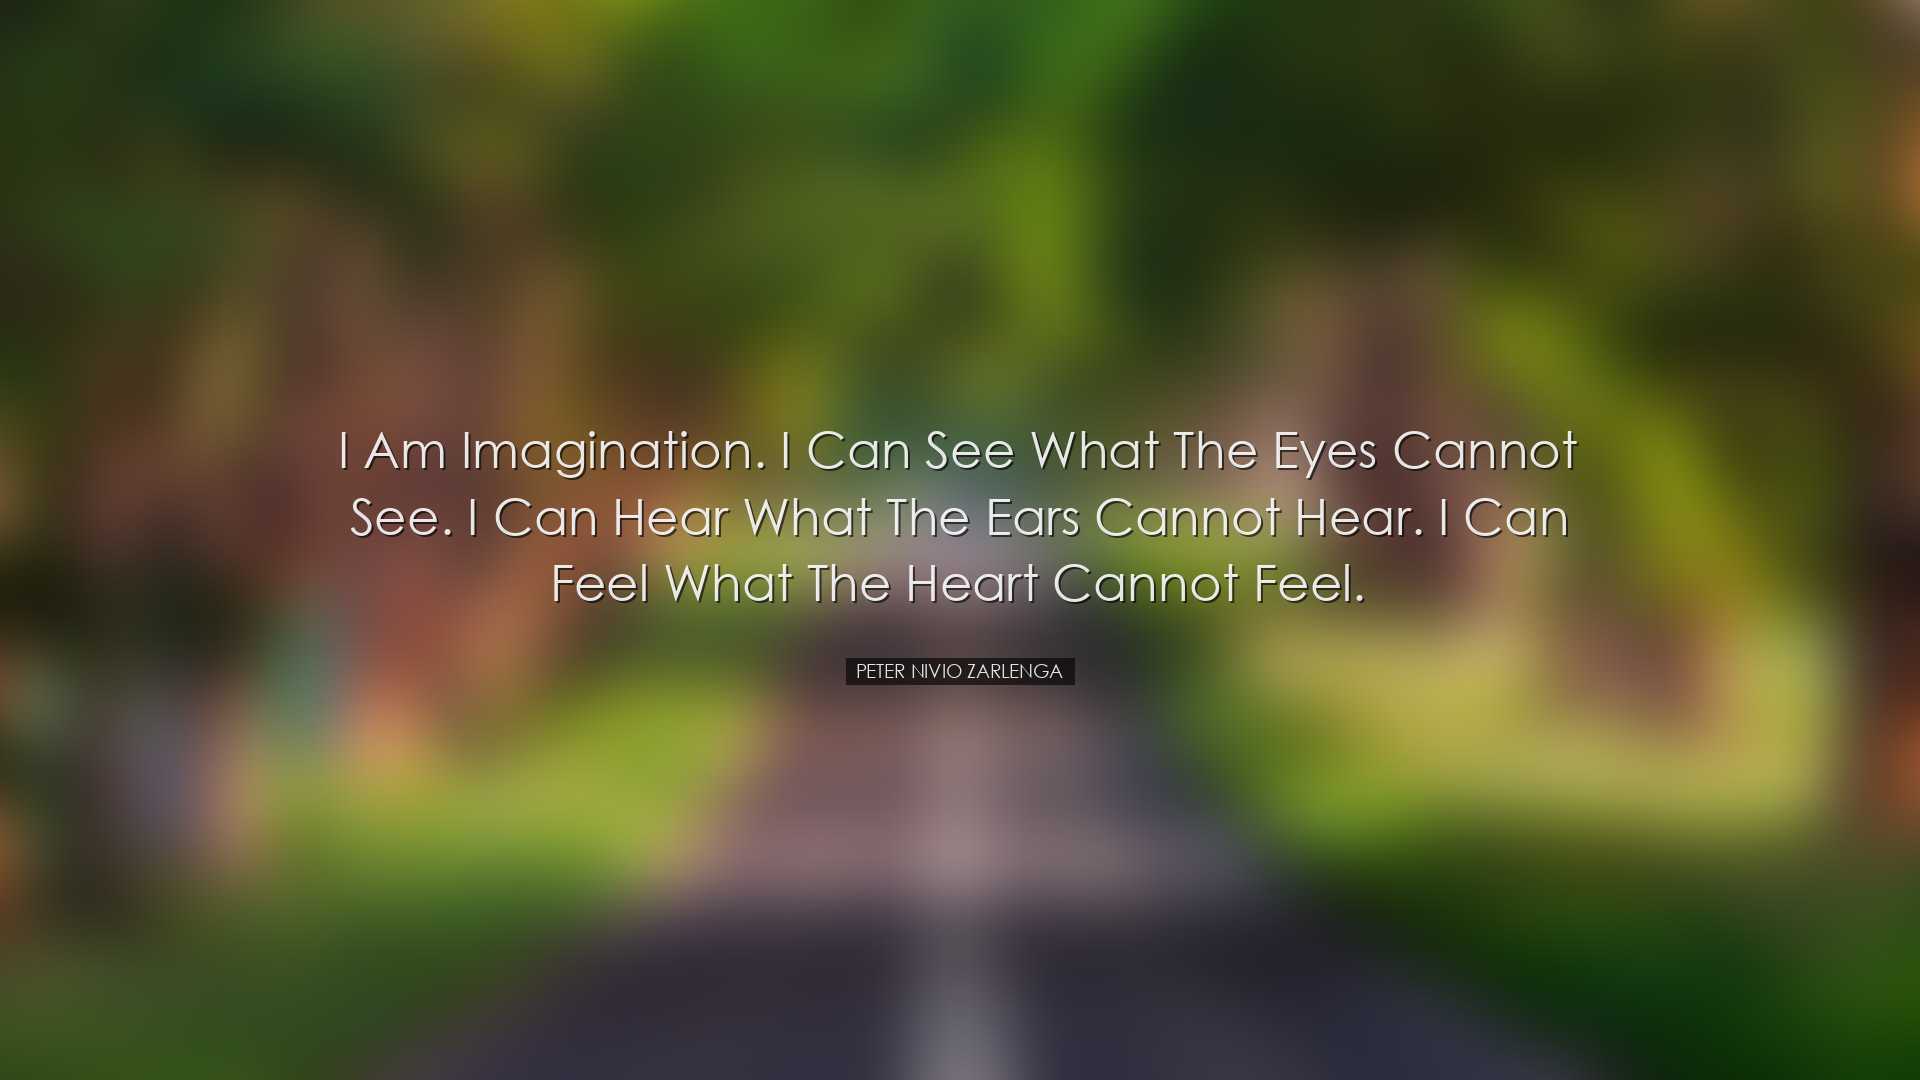 I am imagination. I can see what the eyes cannot see. I can hear w